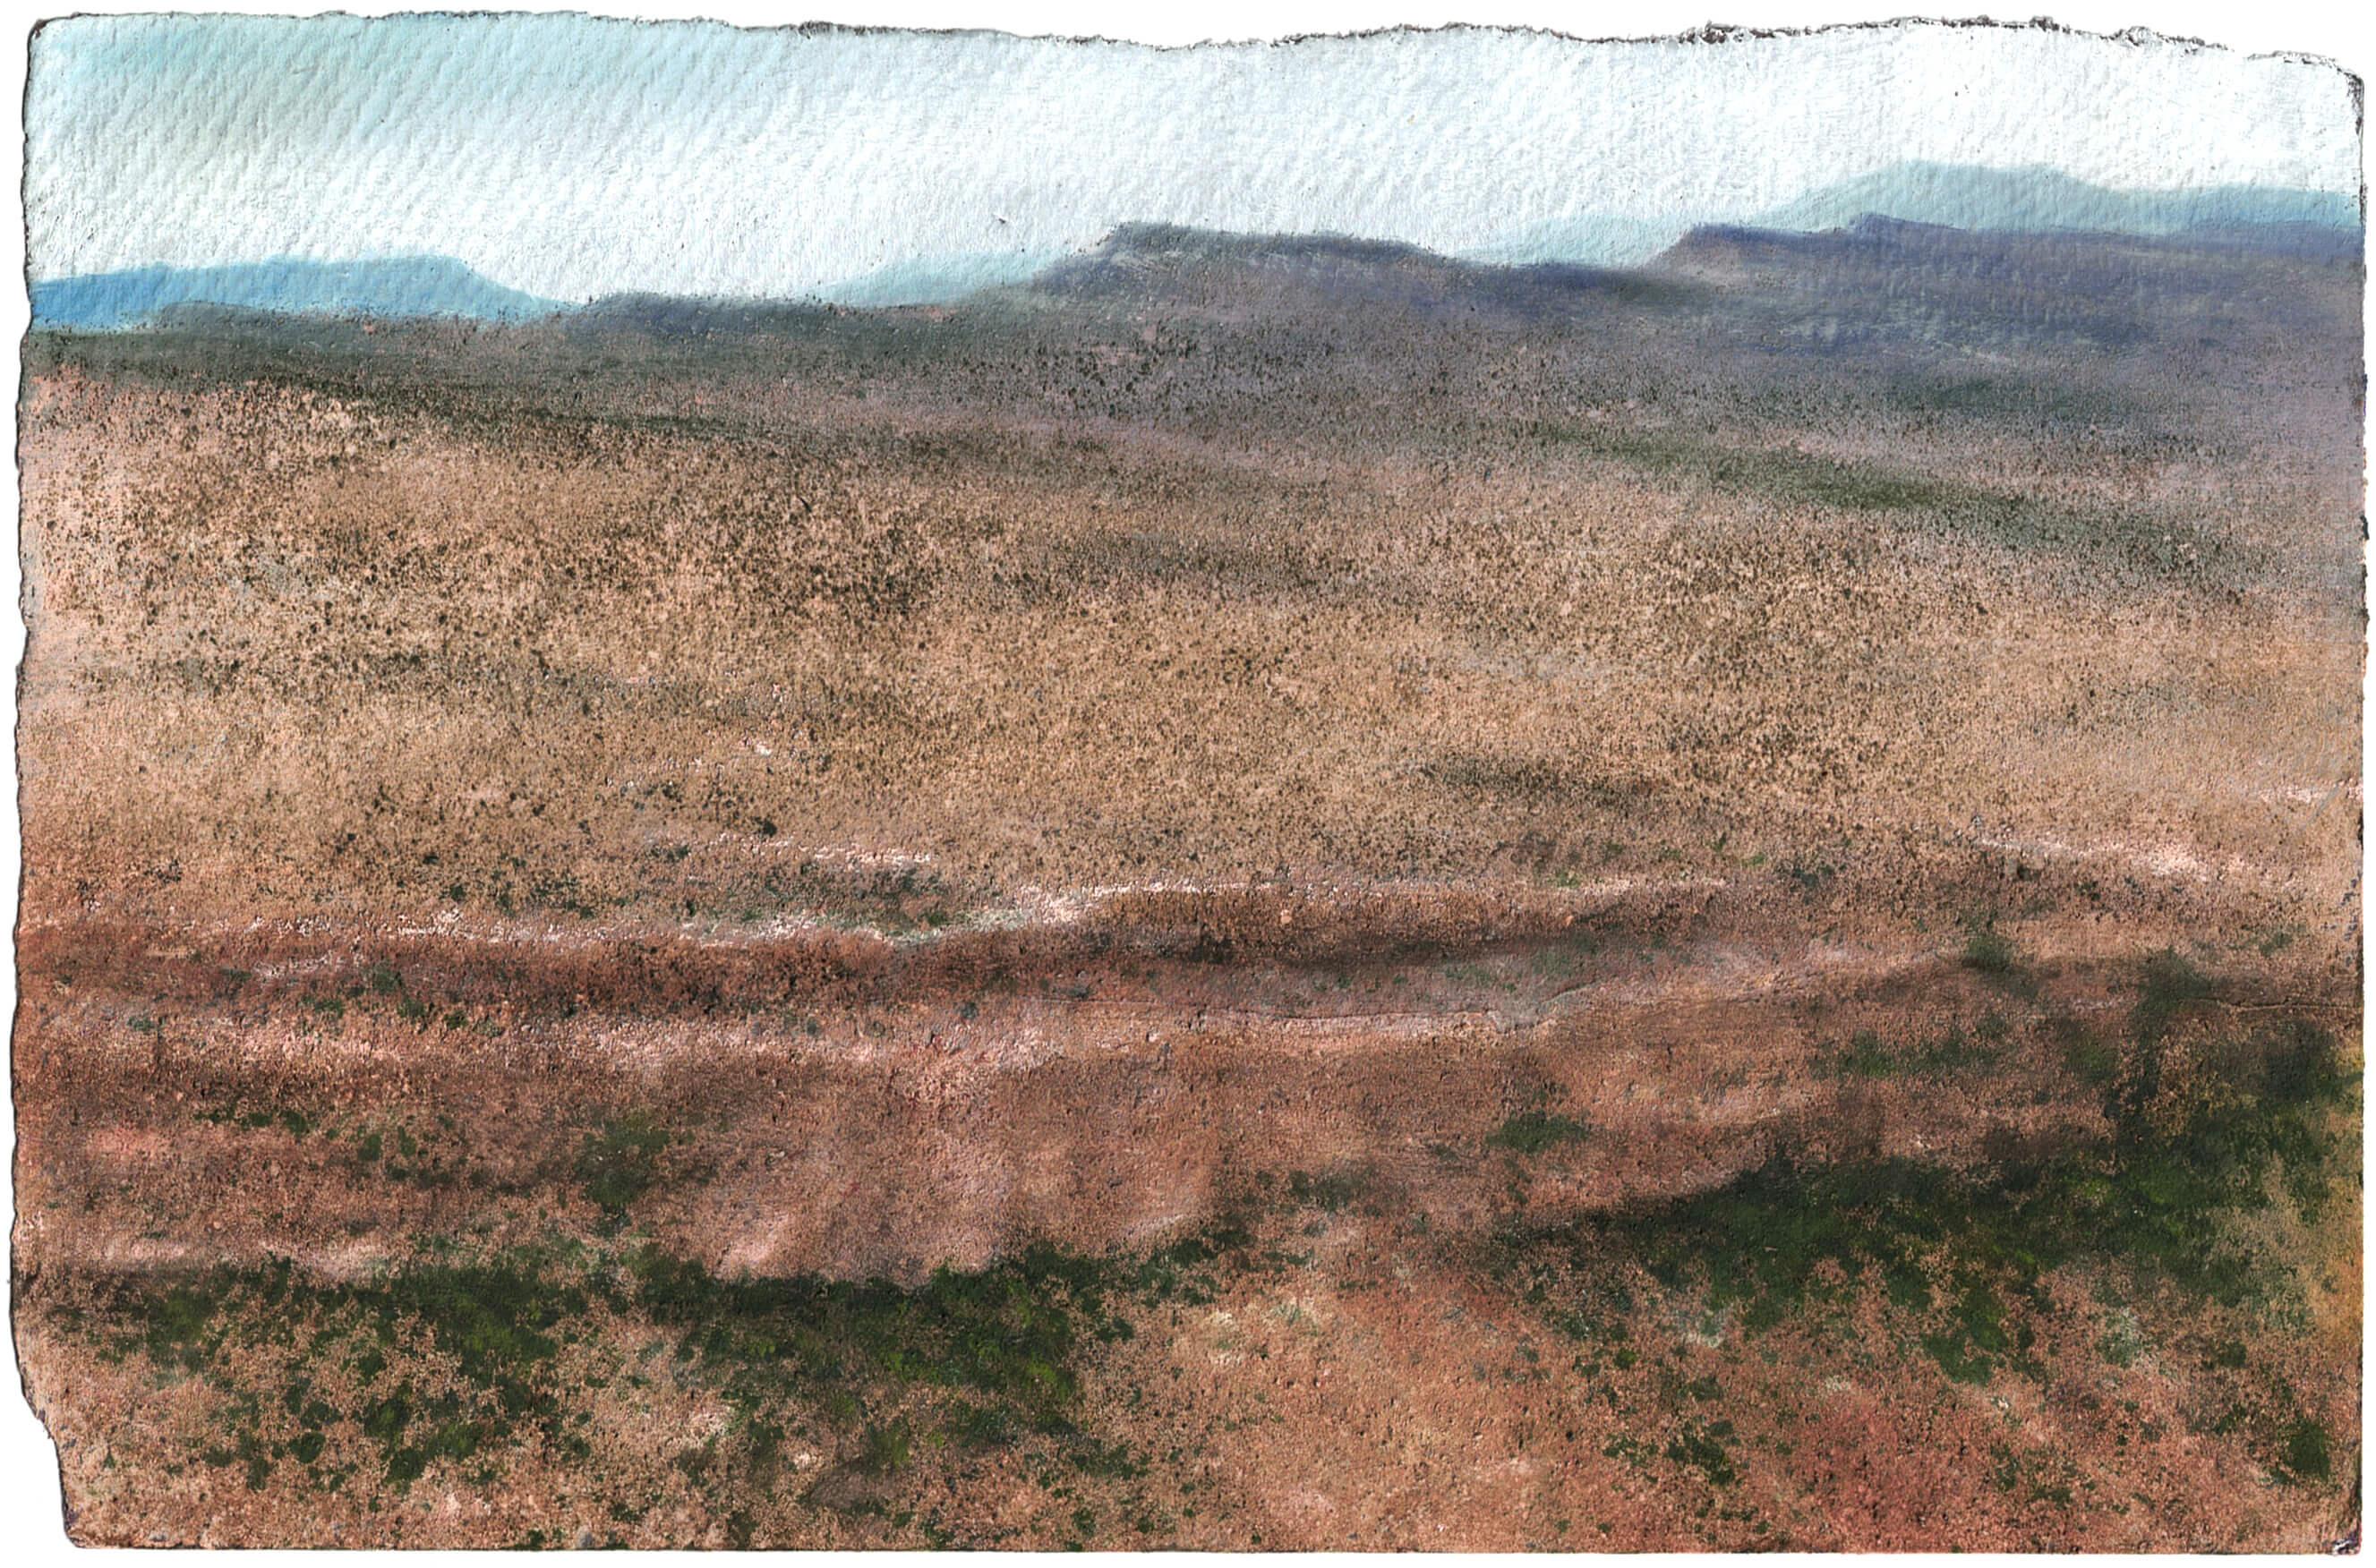 Sawtooths from Above, Original Dirt and Oil Painting